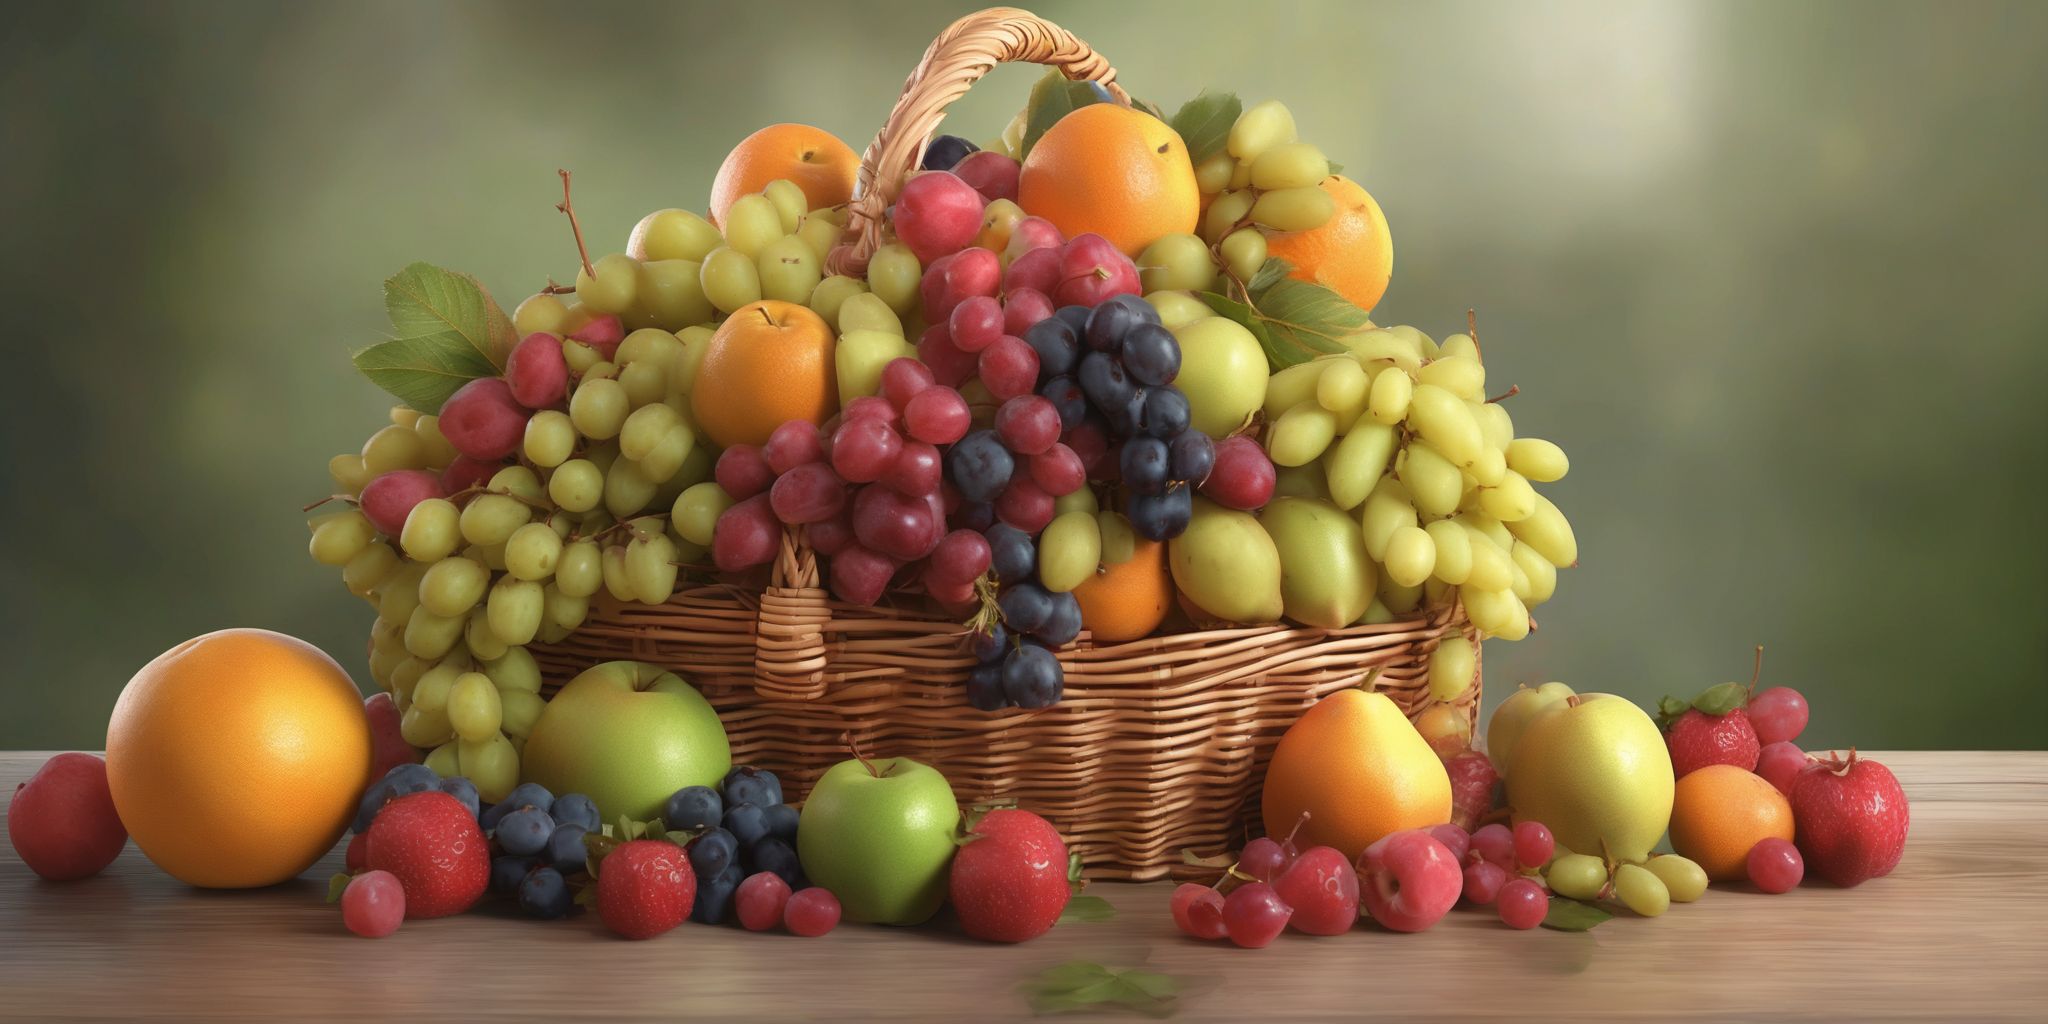 Fruit basket  in realistic, photographic style